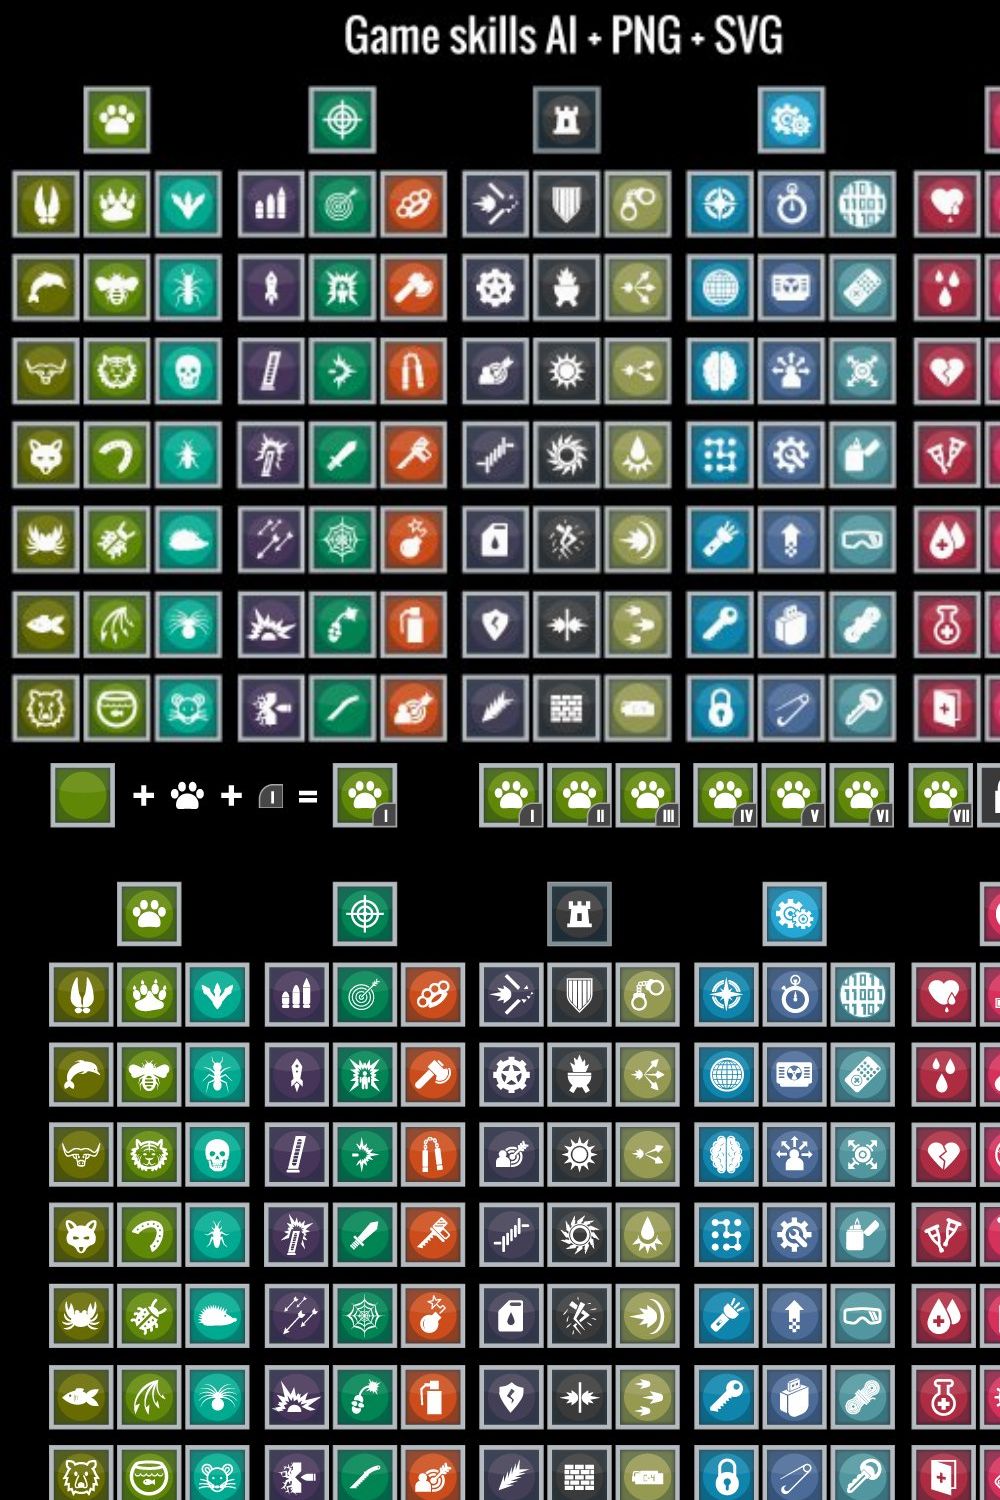 Game skills icons pinterest preview image.